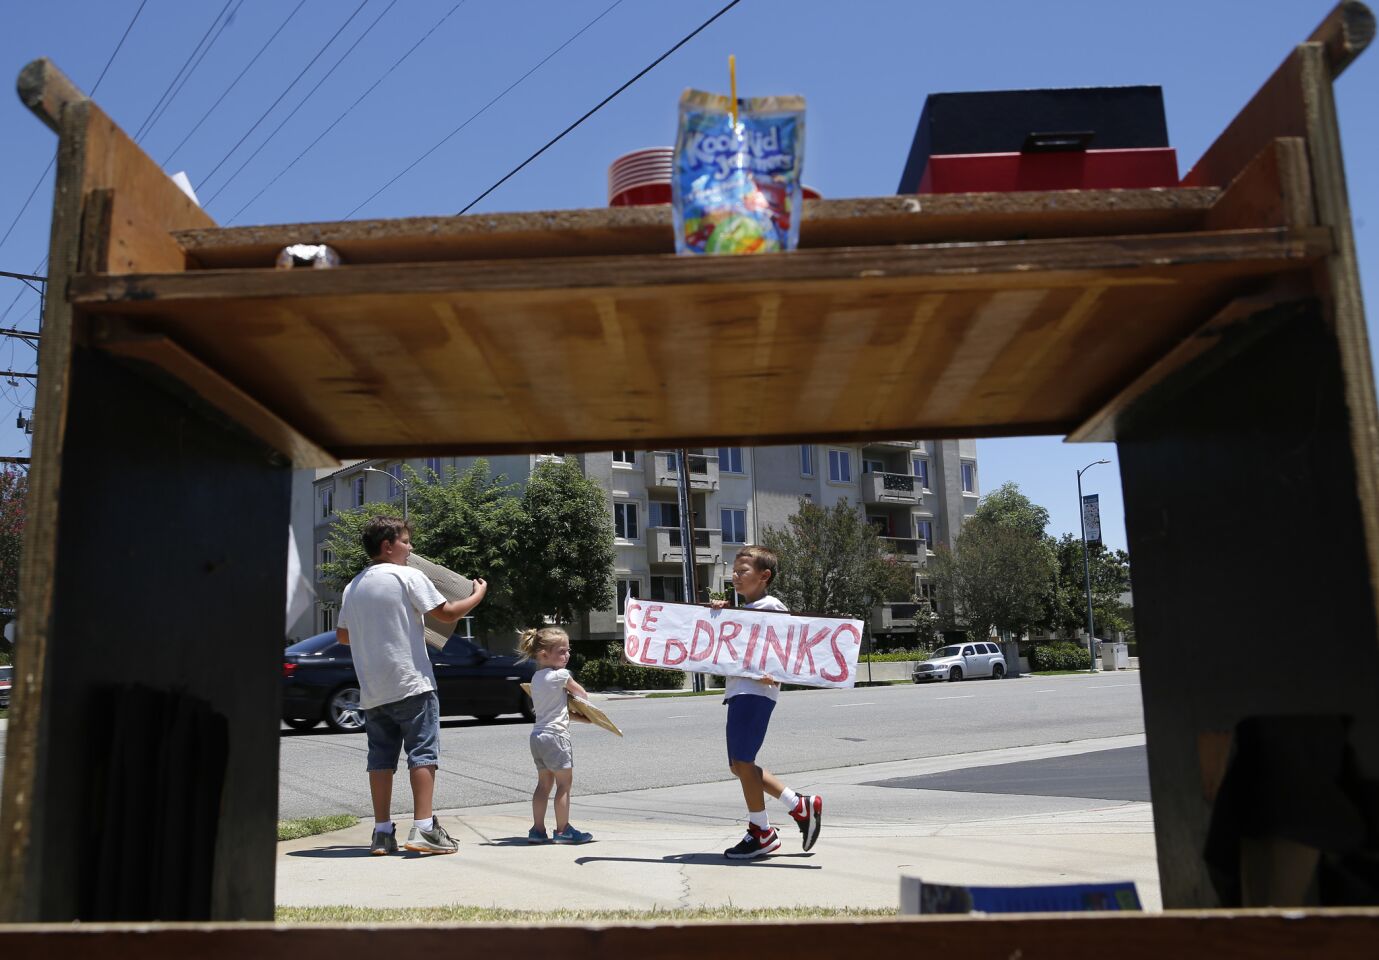 From left, Aaron Stevens, 11, Alida Stevens, 4, and Brian Botts, 9, wave down customers as they sale refreshments on a hot summer day in Van Nuys. "We want to help people hydrate while helping ourselves," Aaron Stevens said.